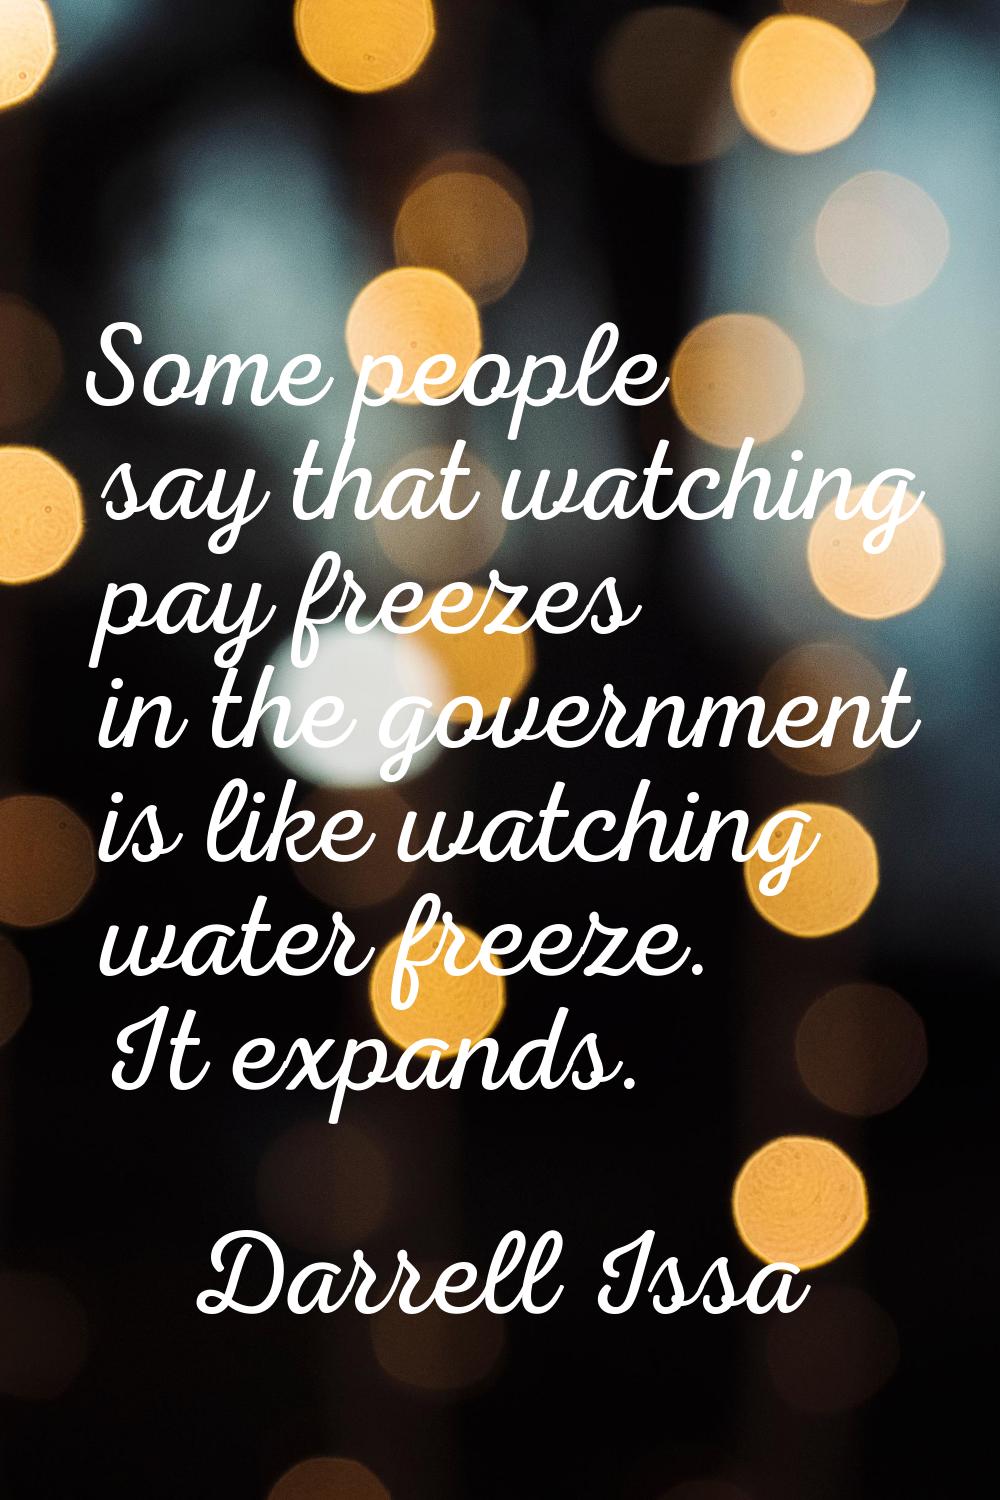 Some people say that watching pay freezes in the government is like watching water freeze. It expan